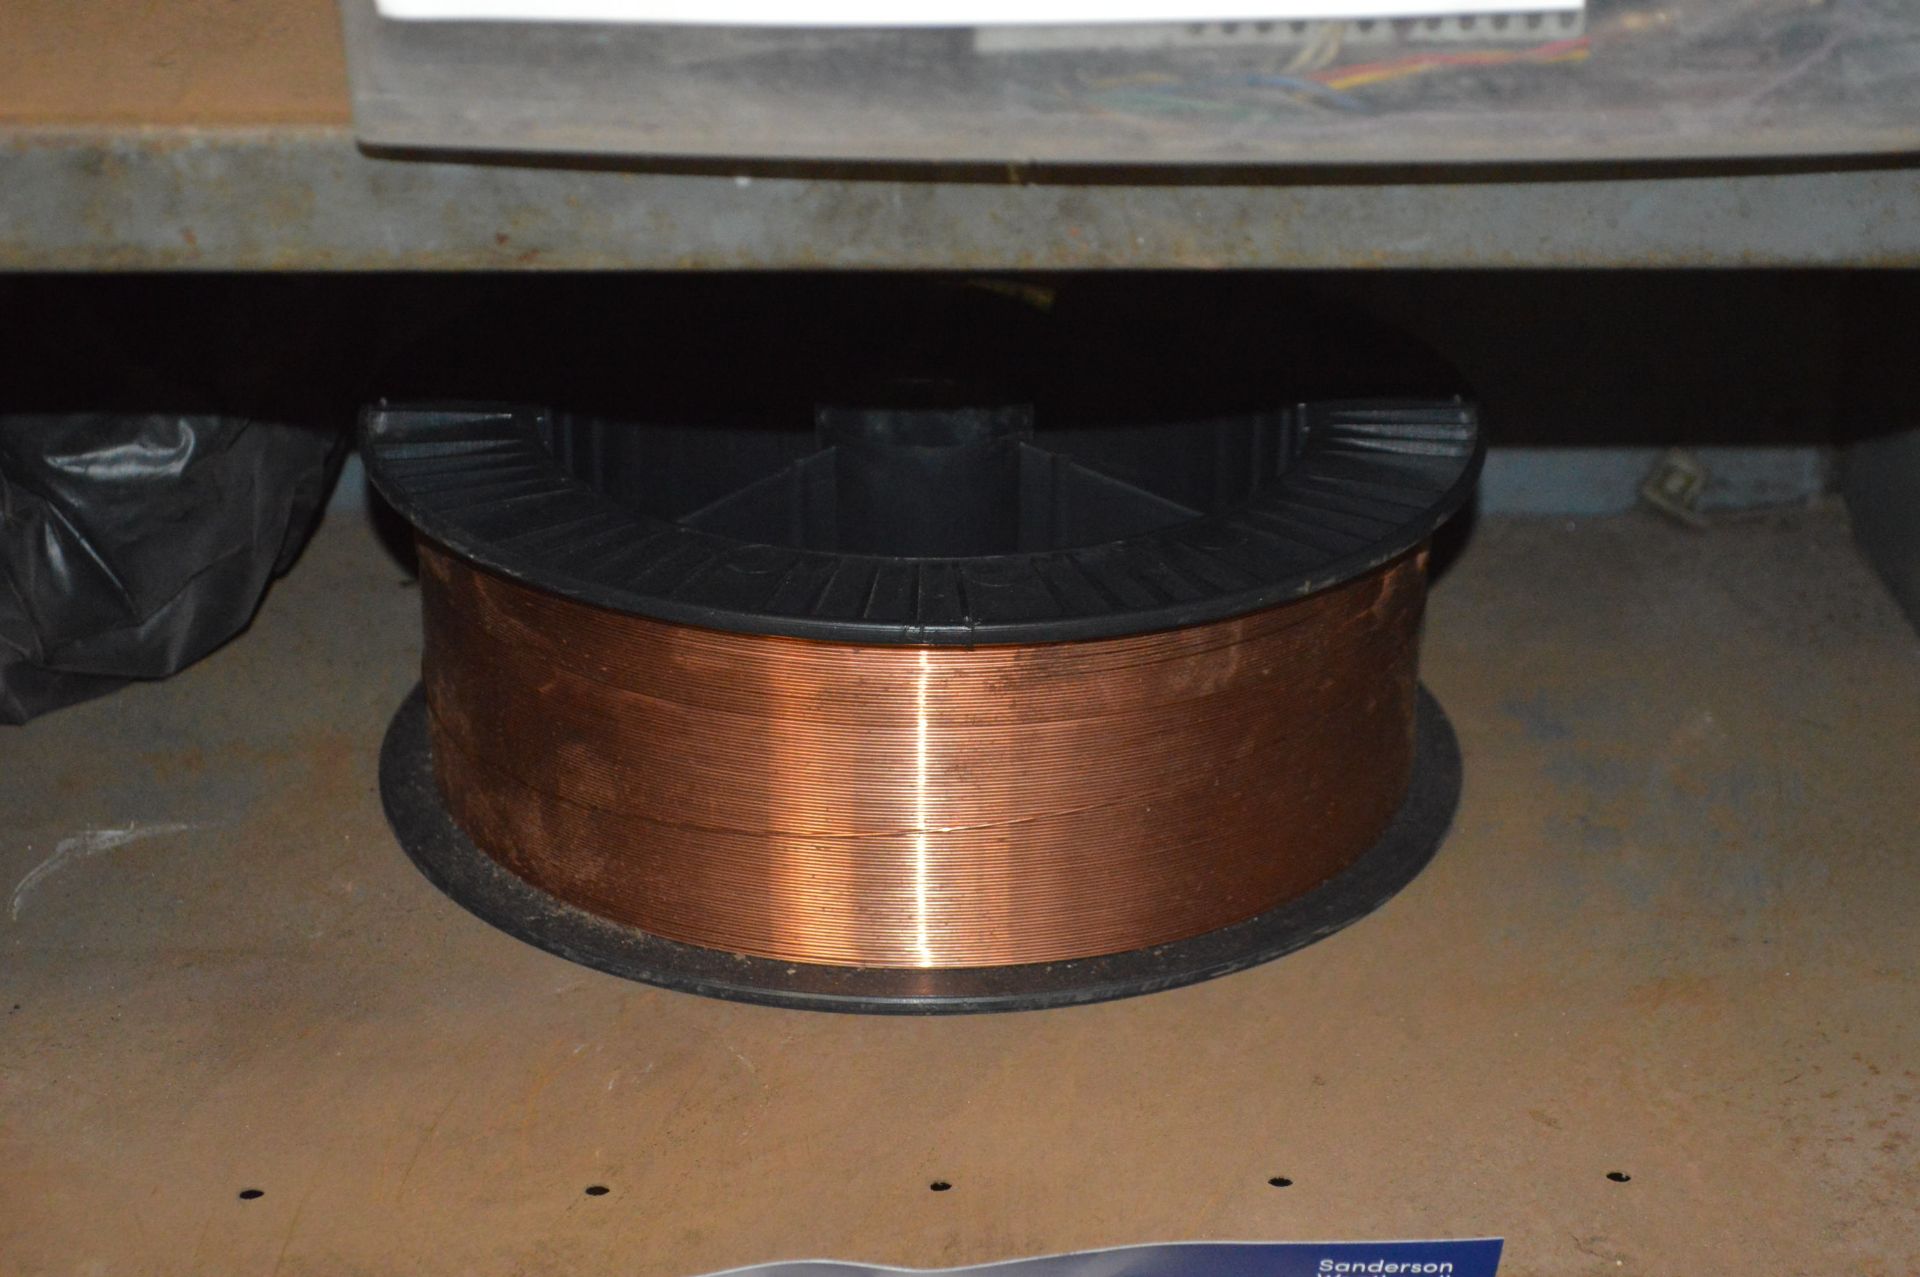 Reel of Cable, as set out on one tier of cabinet